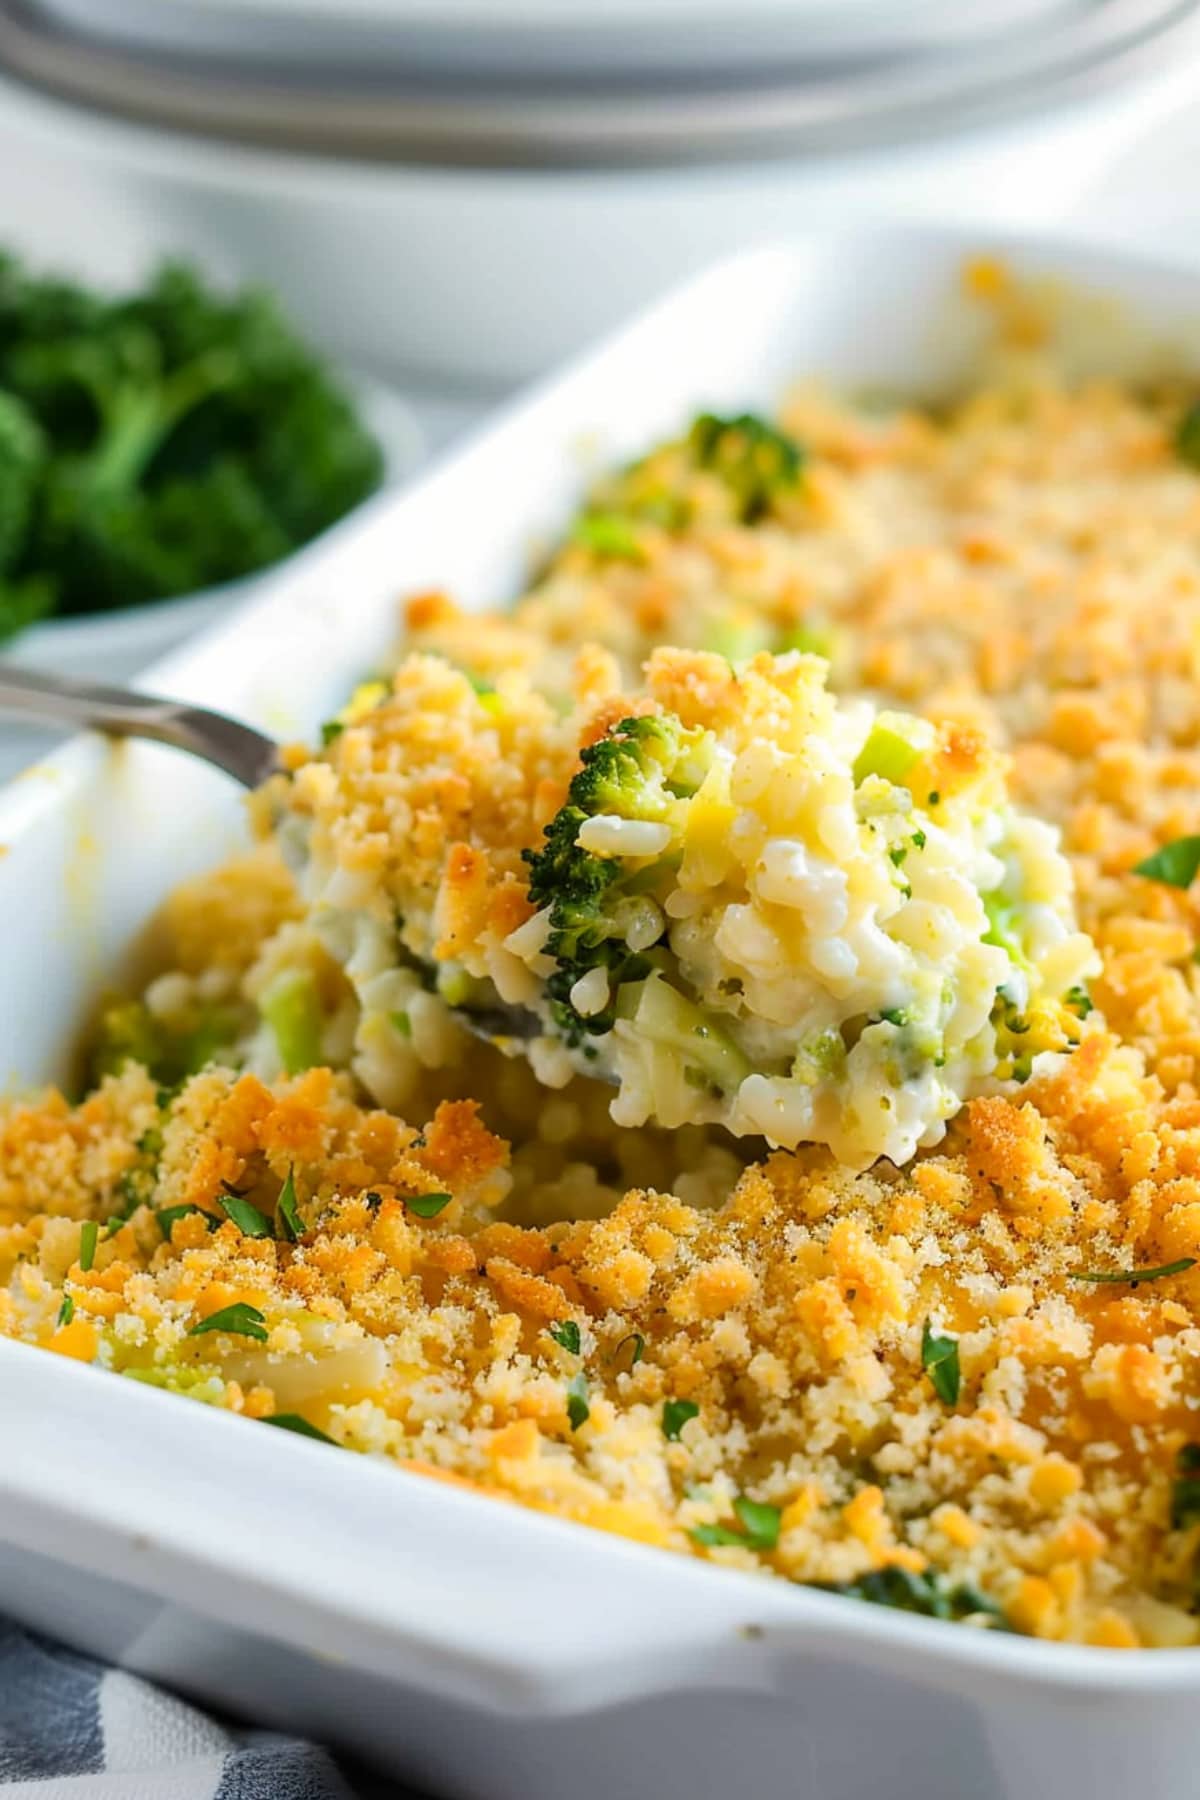 A hearty serving of broccoli rice casserole, featuring a cheesy and crumbly topping